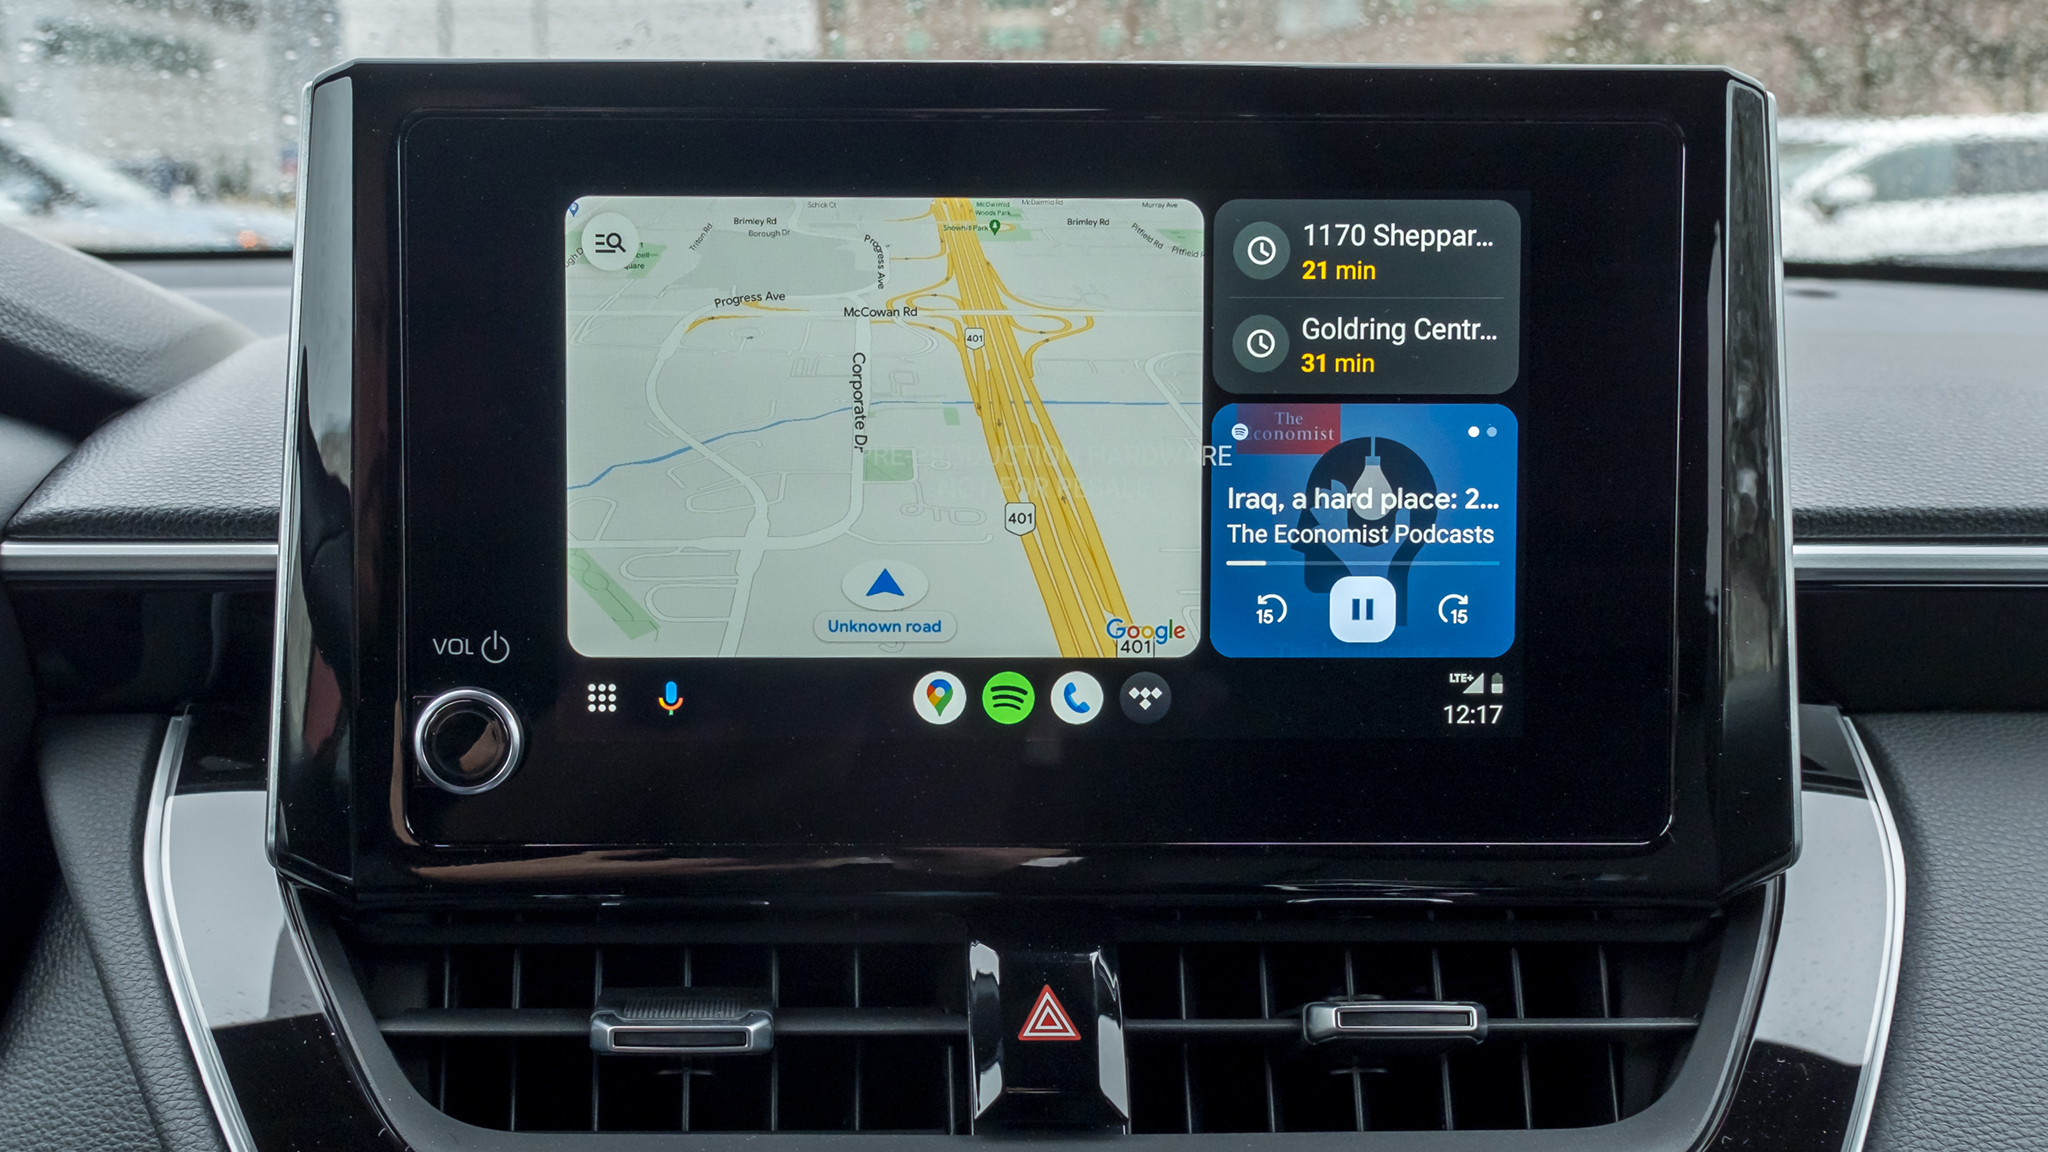 Android Auto  Latest news, supported cars, more - 9to5Google